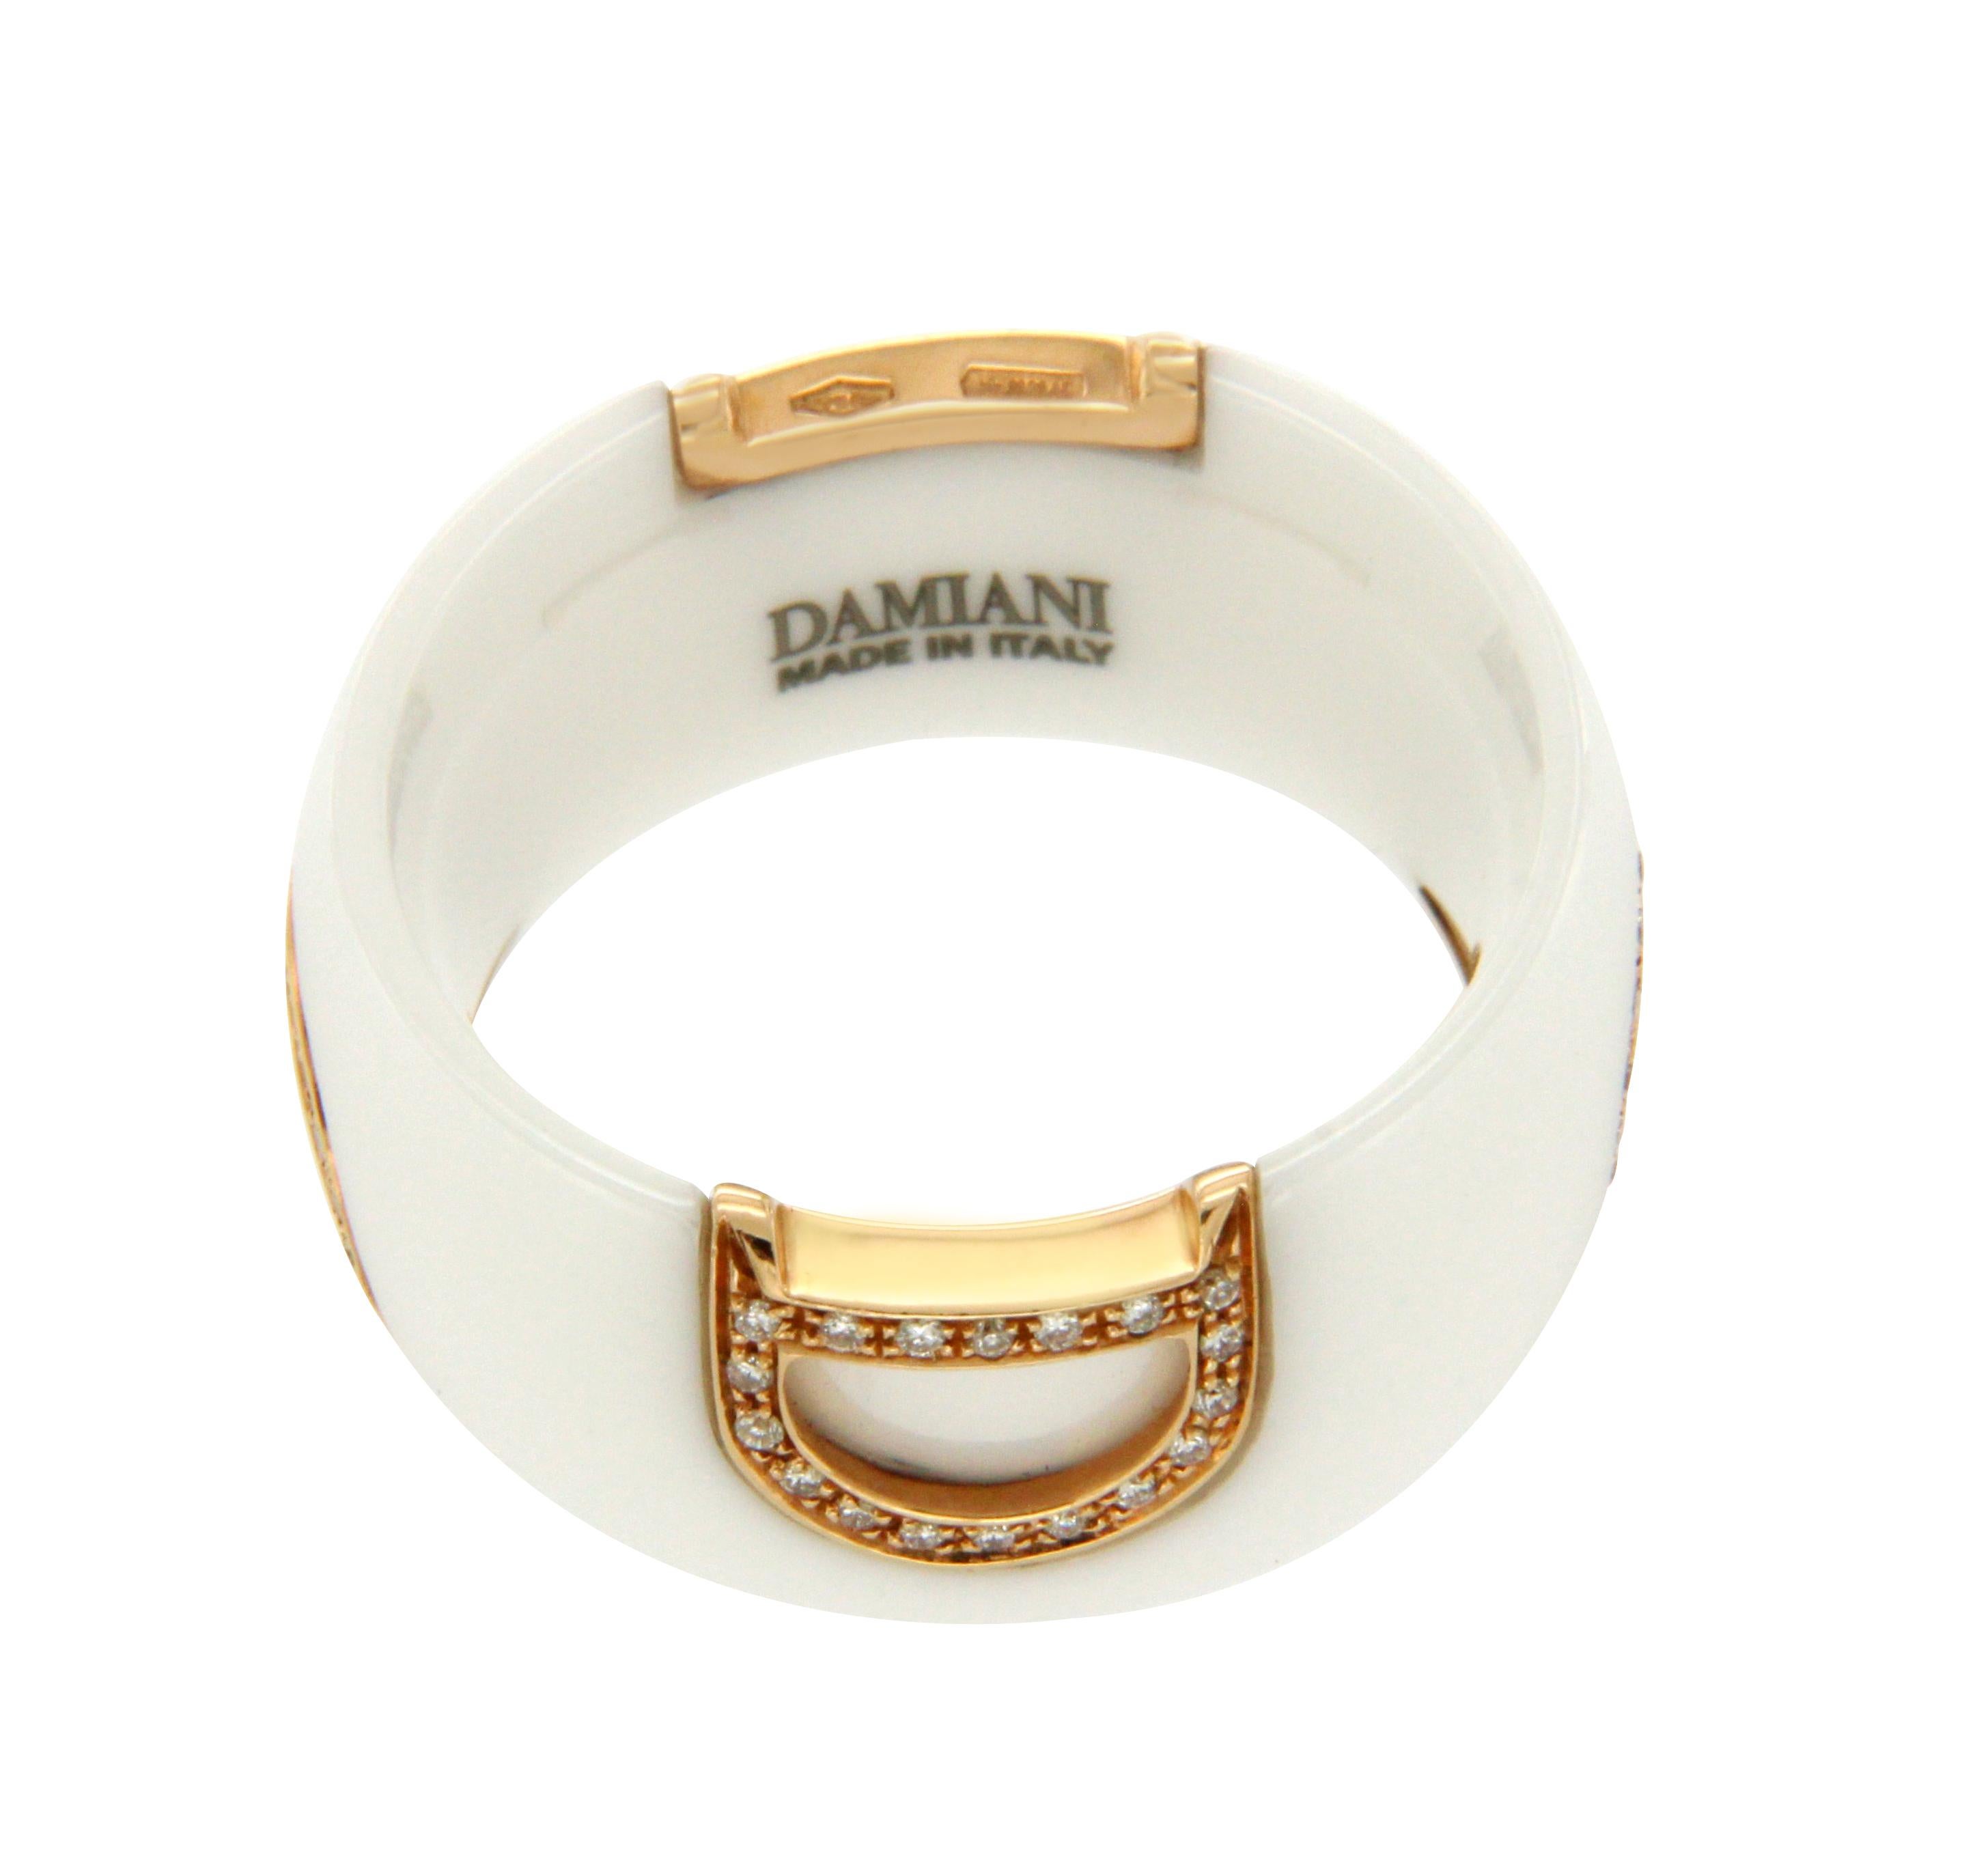 Type: Ring
Top: 10 mm
Band Width: 10 mm
Metal: Rose Gold & Ceramic
Metal Purity: 18K
Hallmarks: Damiani 750
Total Weight: 9.5 Gram
Stone Type: Diamond
Condition: New With Box
Stock Number: N11
Size: 6